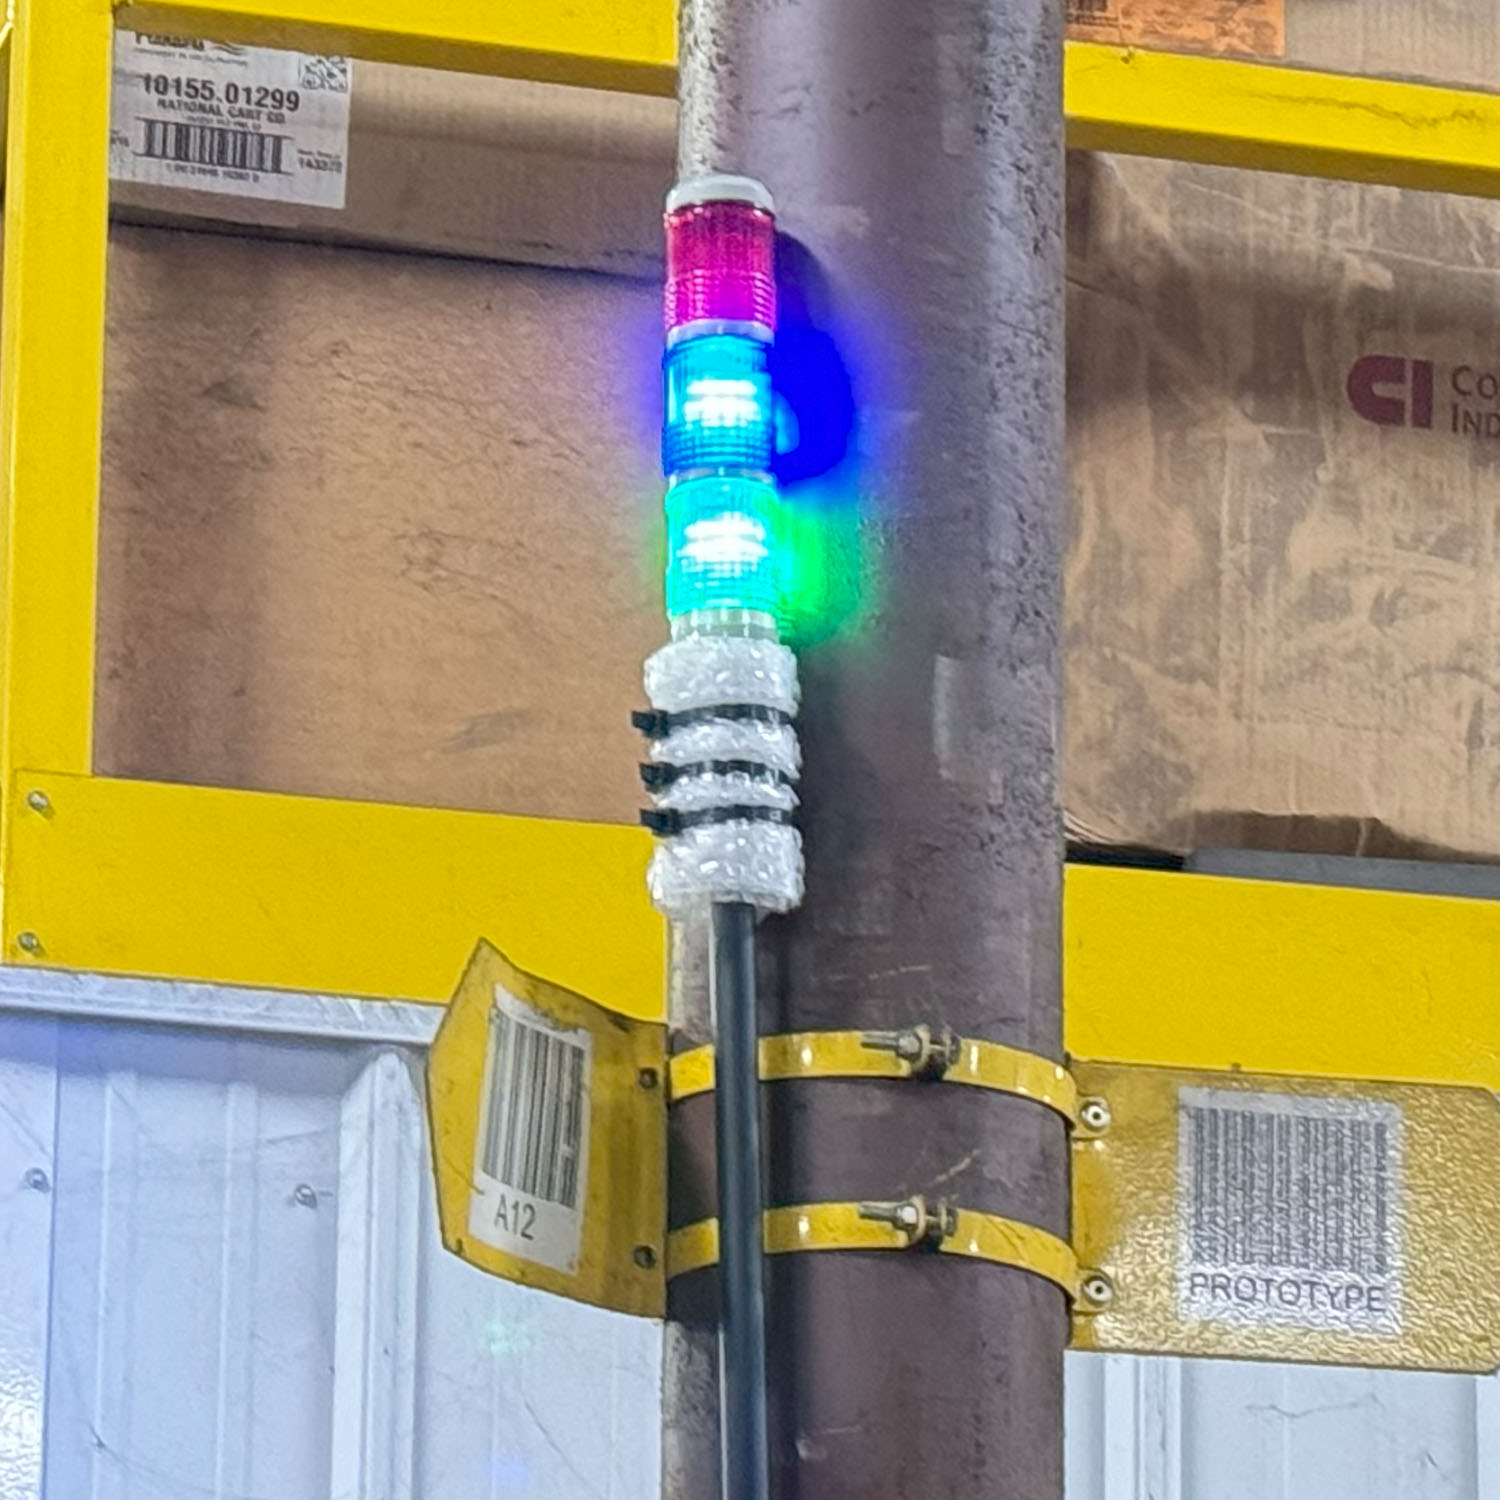 Highly Visible LED Tower: Ensures easy visibility of production status. Provides clear indication of the ongoing processes.